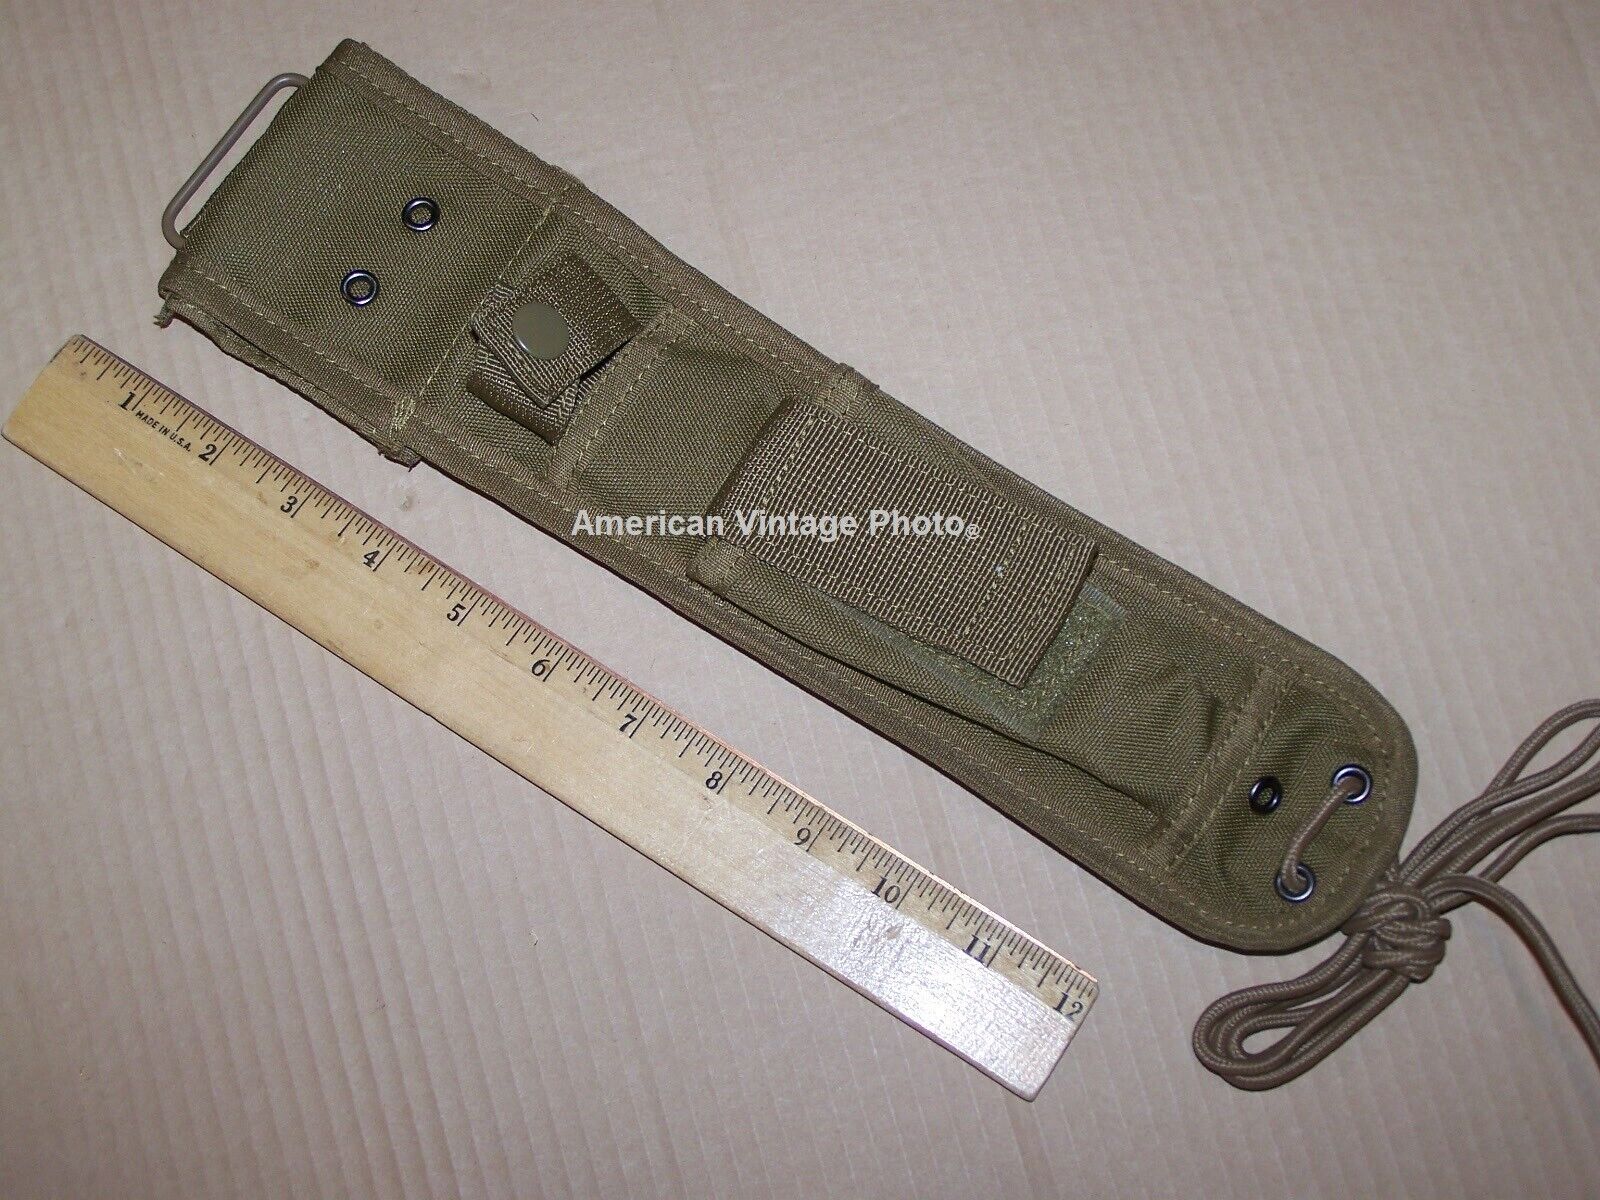 Sheath Scabbard for Bayonet Knife Tactical Military ROTHCO 40065 + P38 Opener